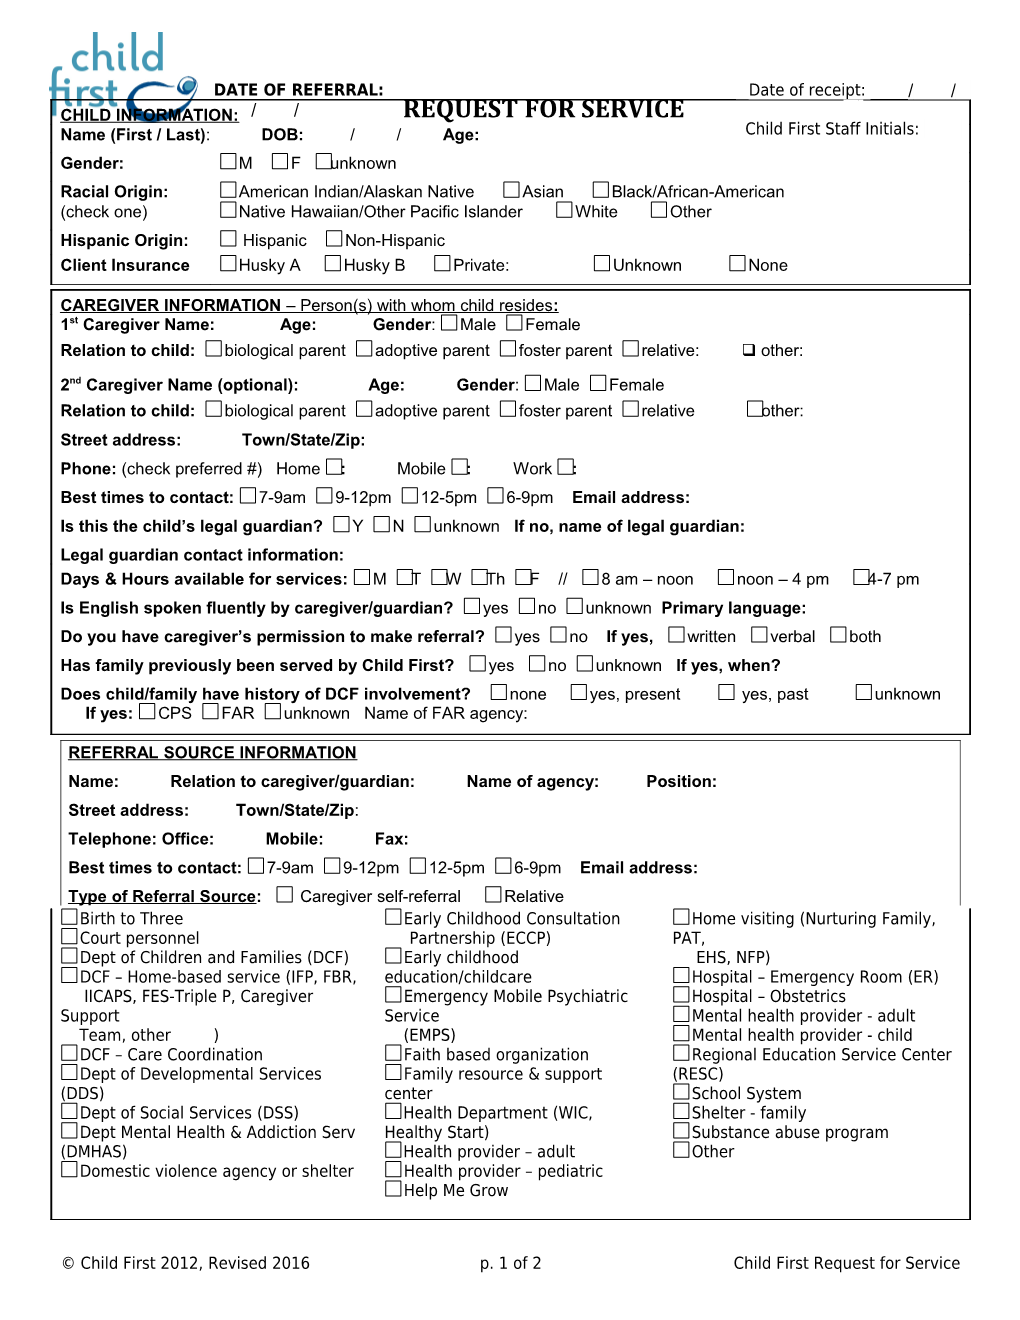 Child FIRST REFERRAL FORM